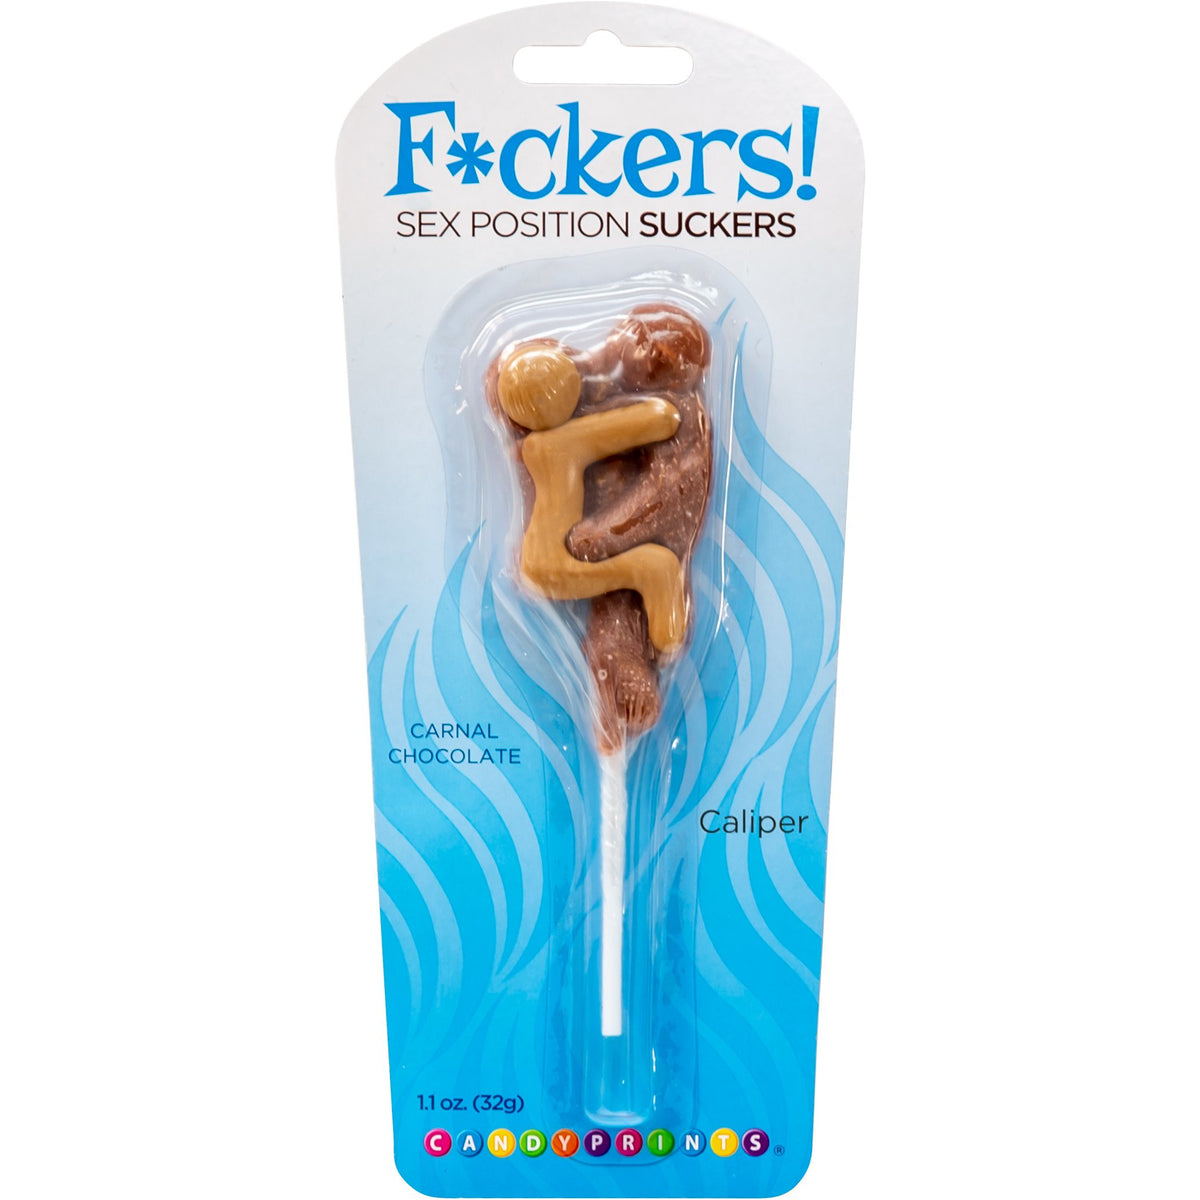 Candyprints Fuckers! Sex Position Sucker Candy - Chocolate